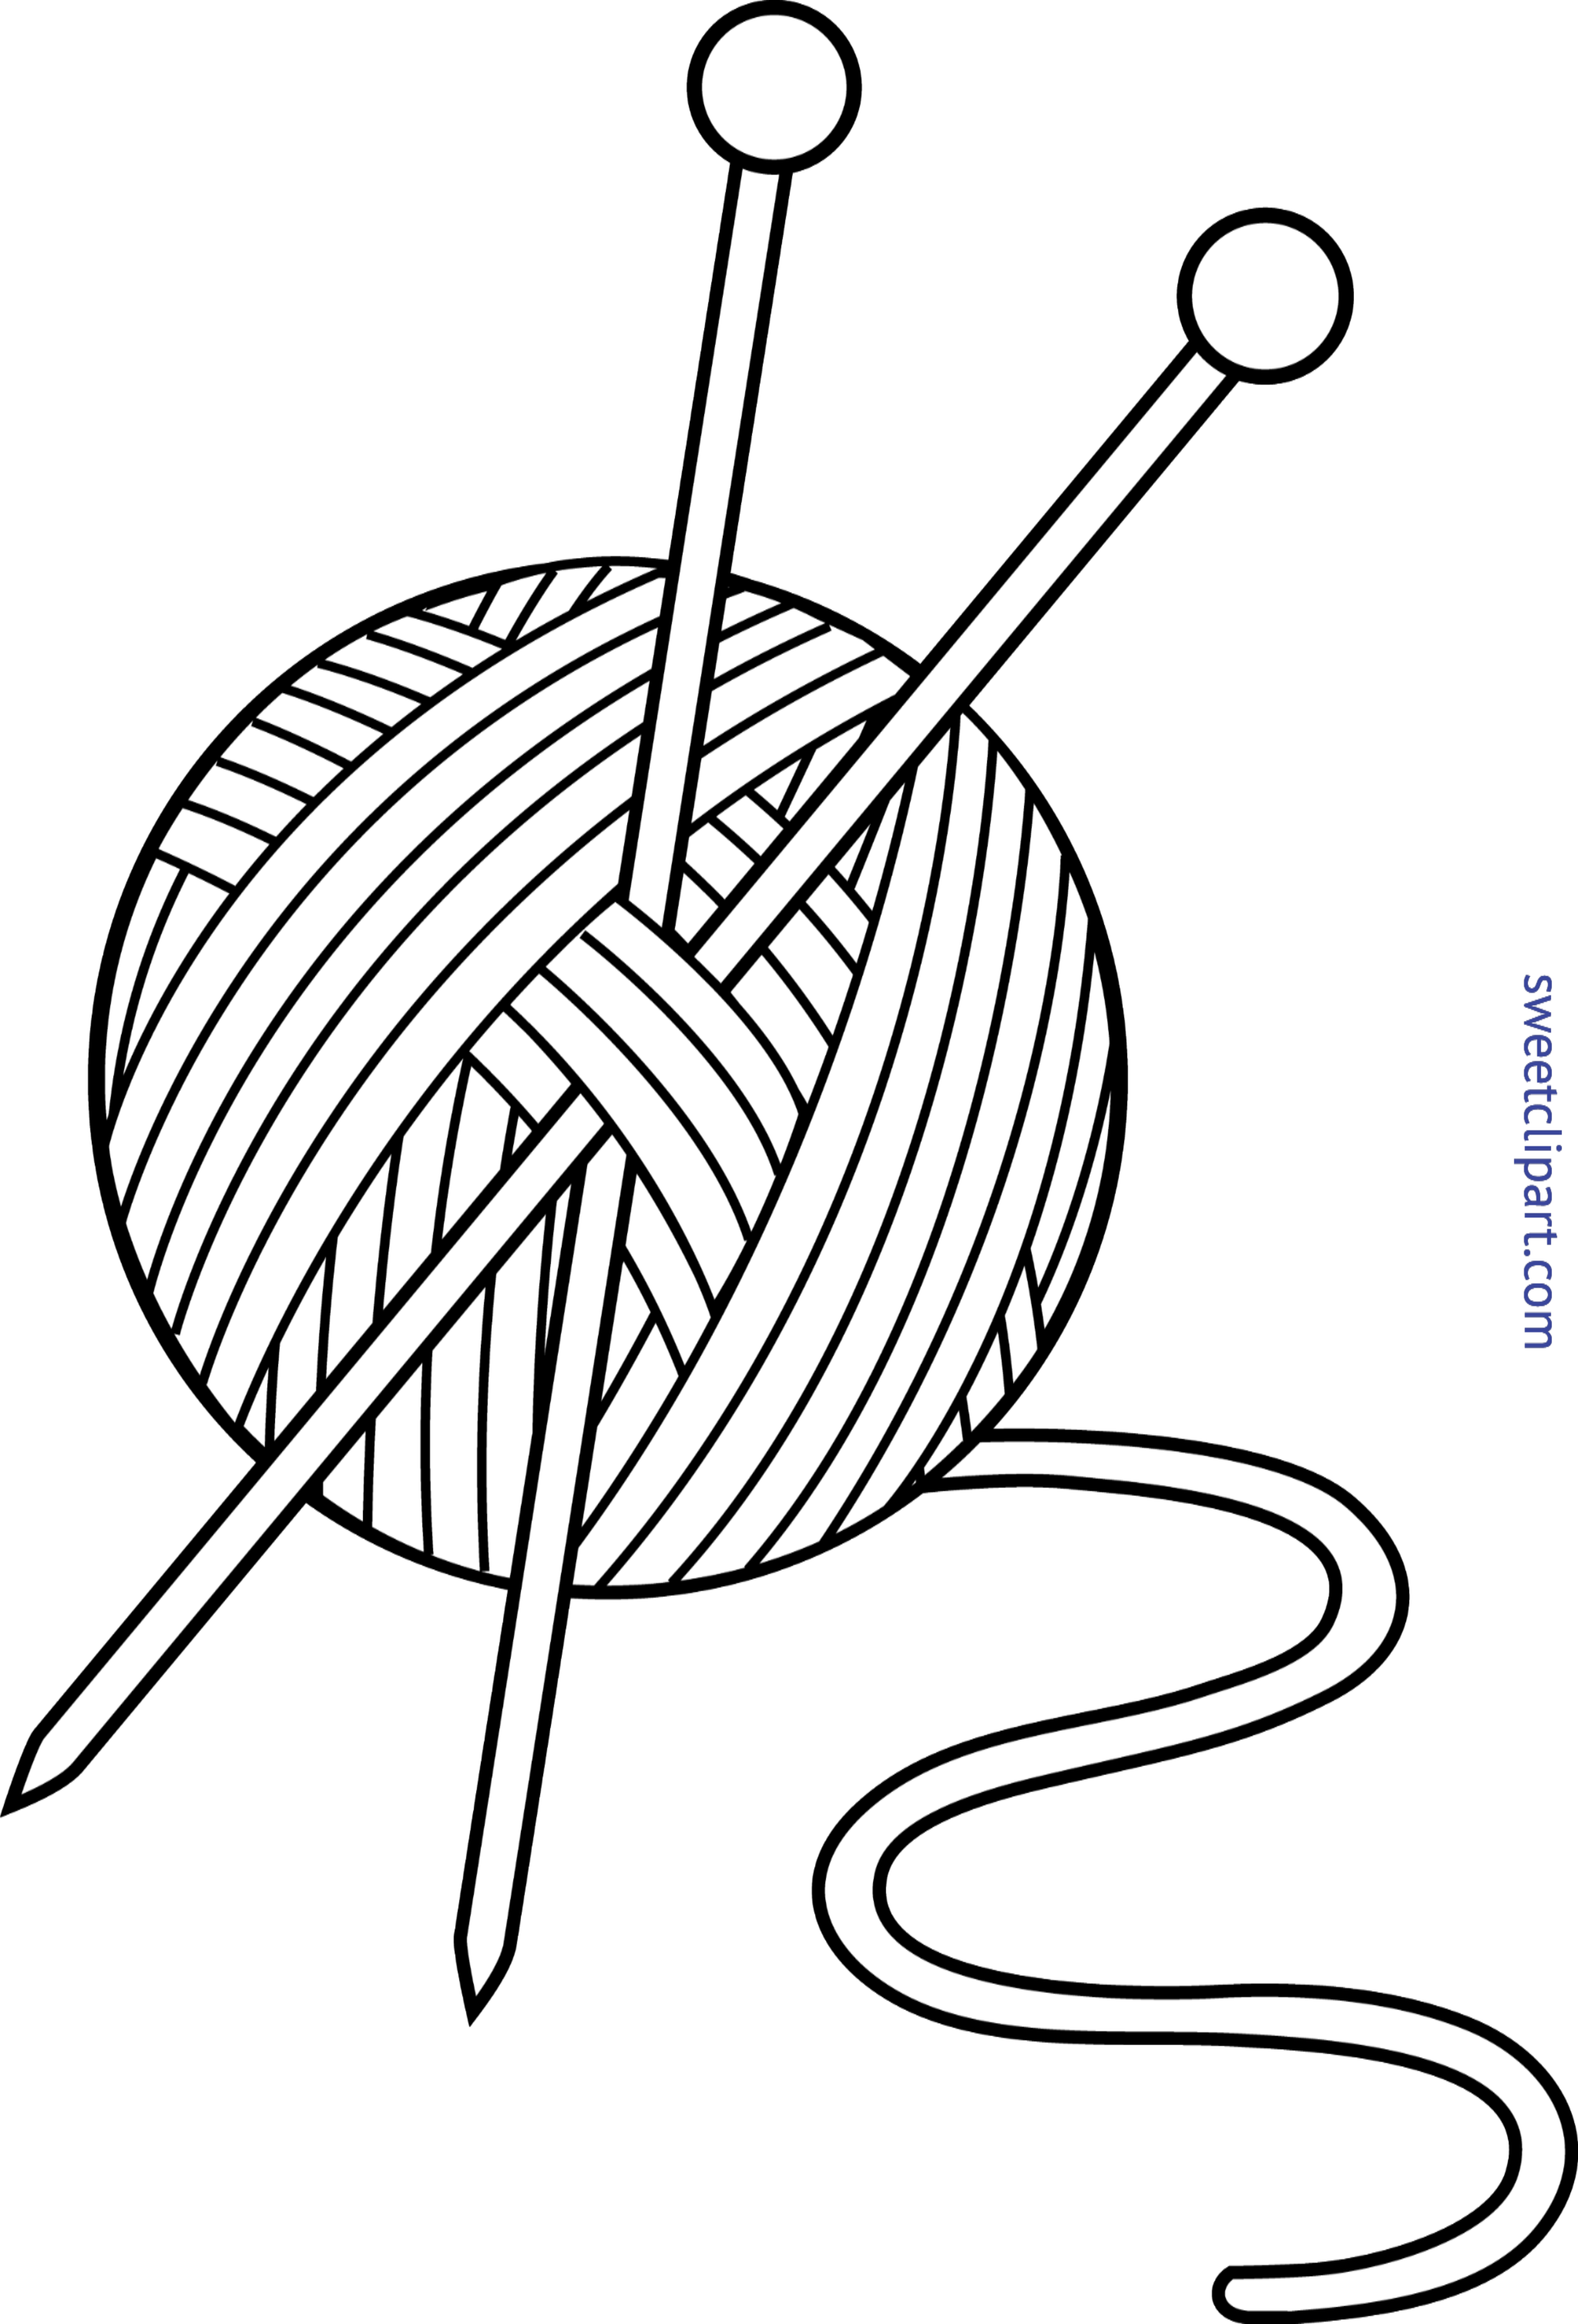 Ball Of Yarn Clipart, Clip Art Of Yard Cleanup, Clip - Wool Black And White (3504x5161)